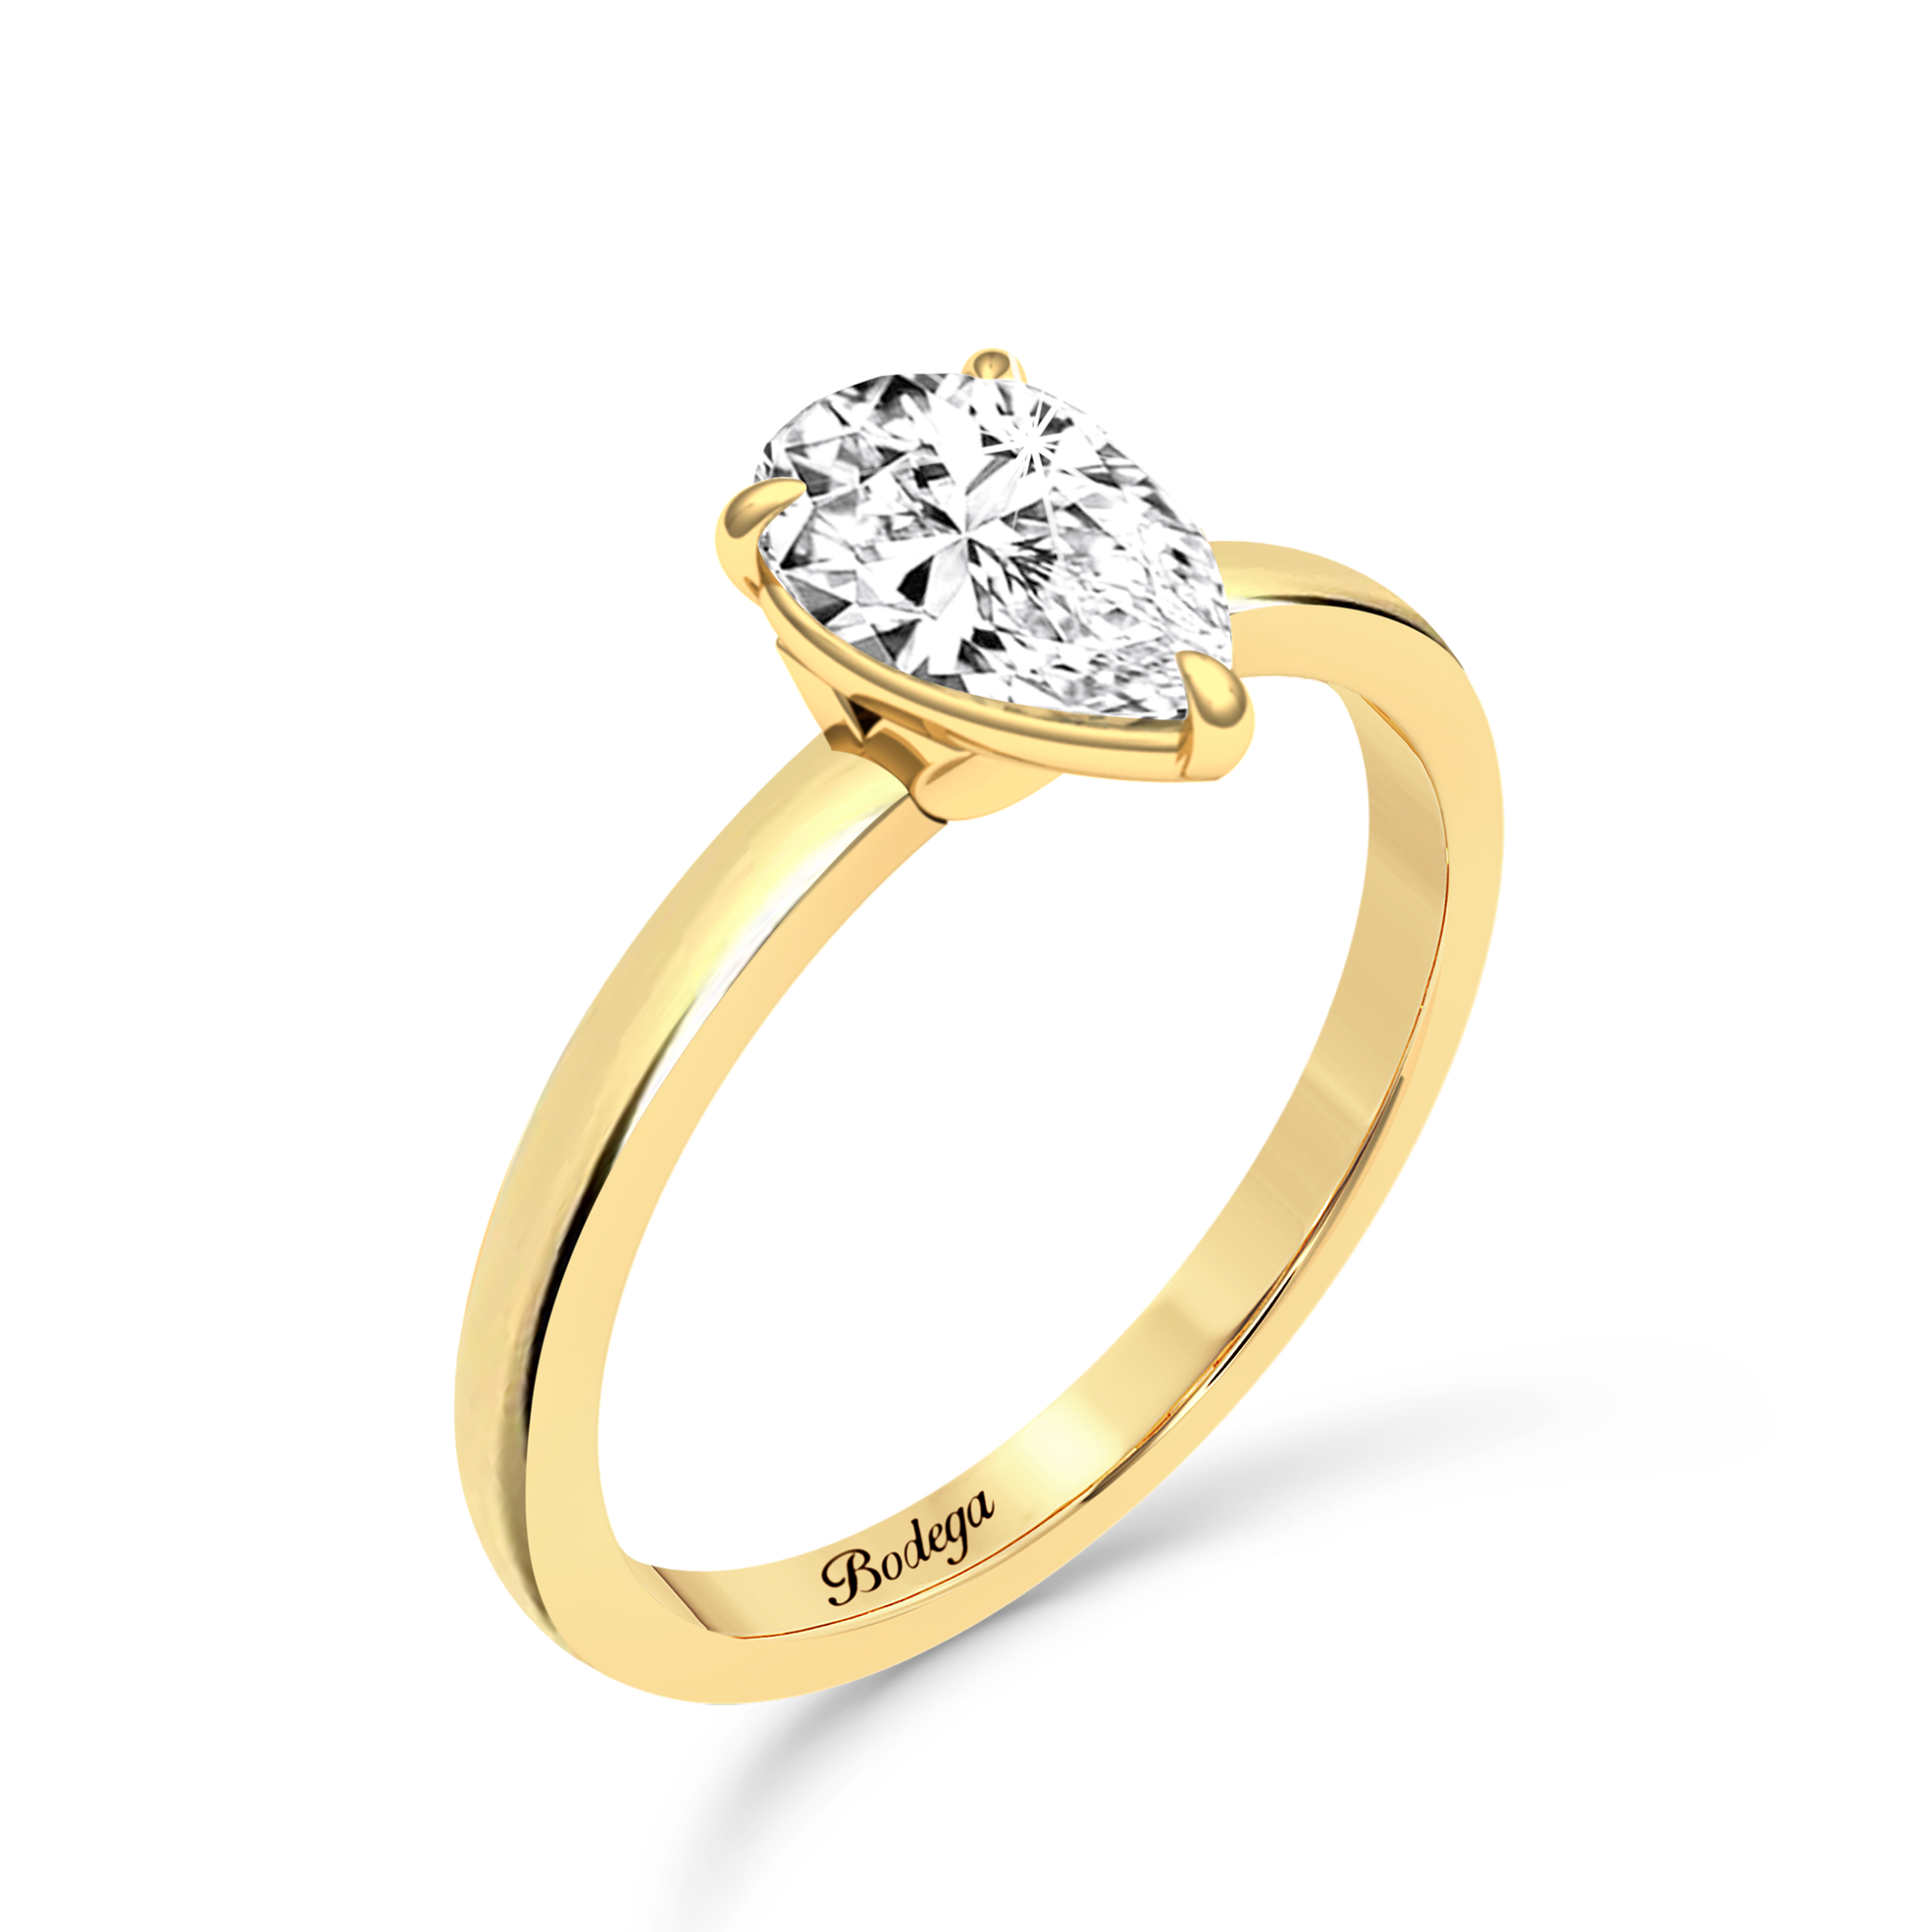 Pear Cut Solitaire Ring in flush setting - Yellow Gold - Bodega